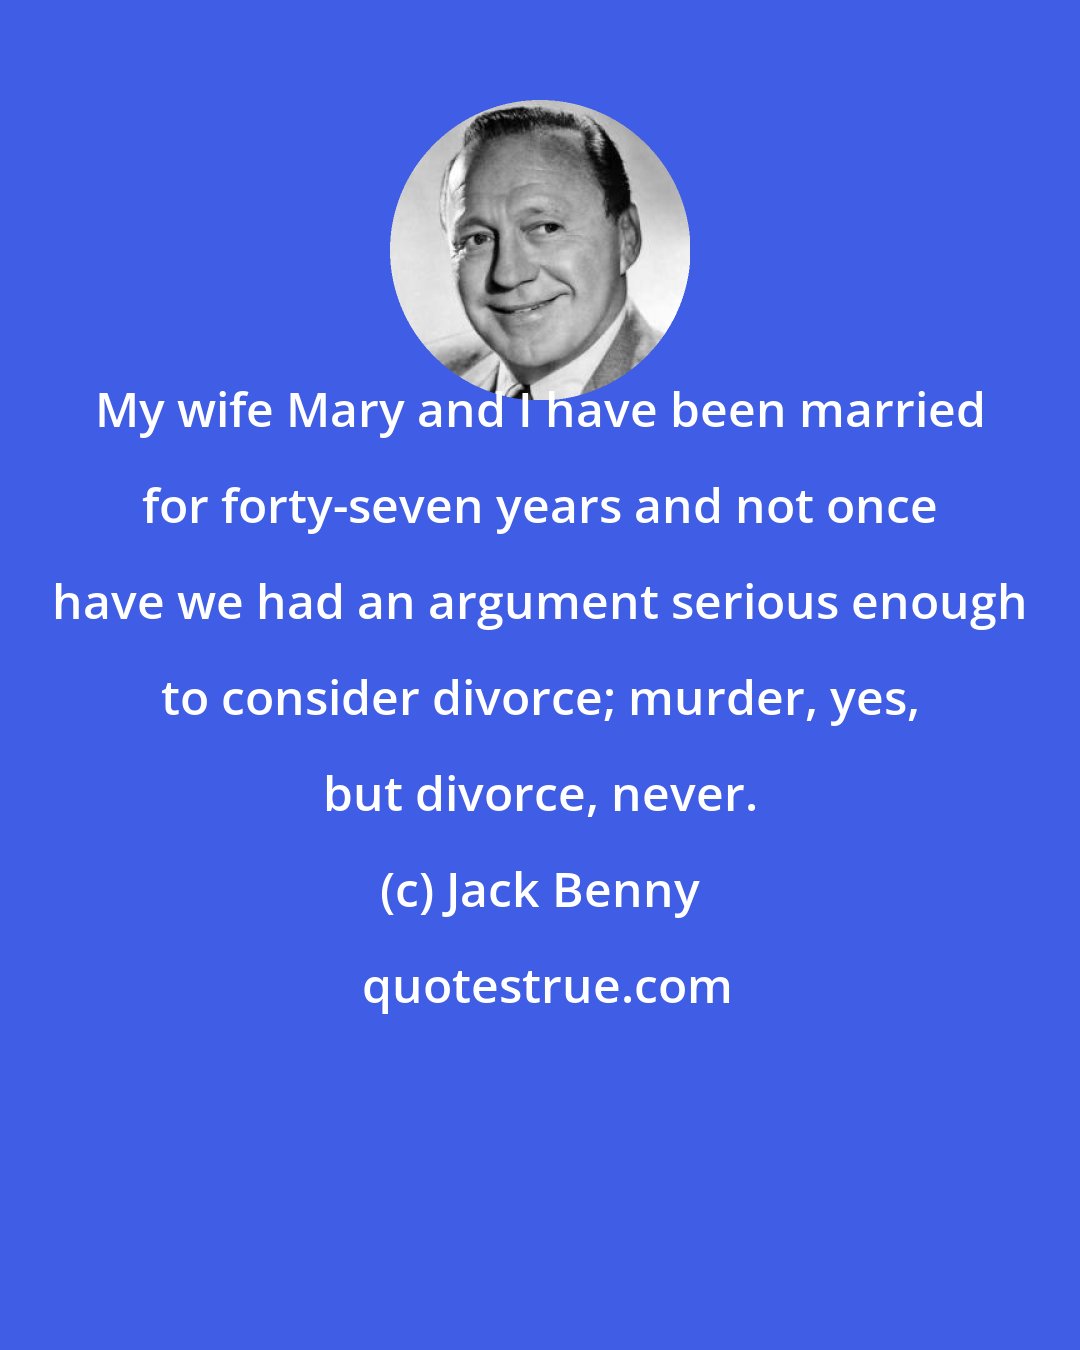 Jack Benny: My wife Mary and I have been married for forty-seven years and not once have we had an argument serious enough to consider divorce; murder, yes, but divorce, never.